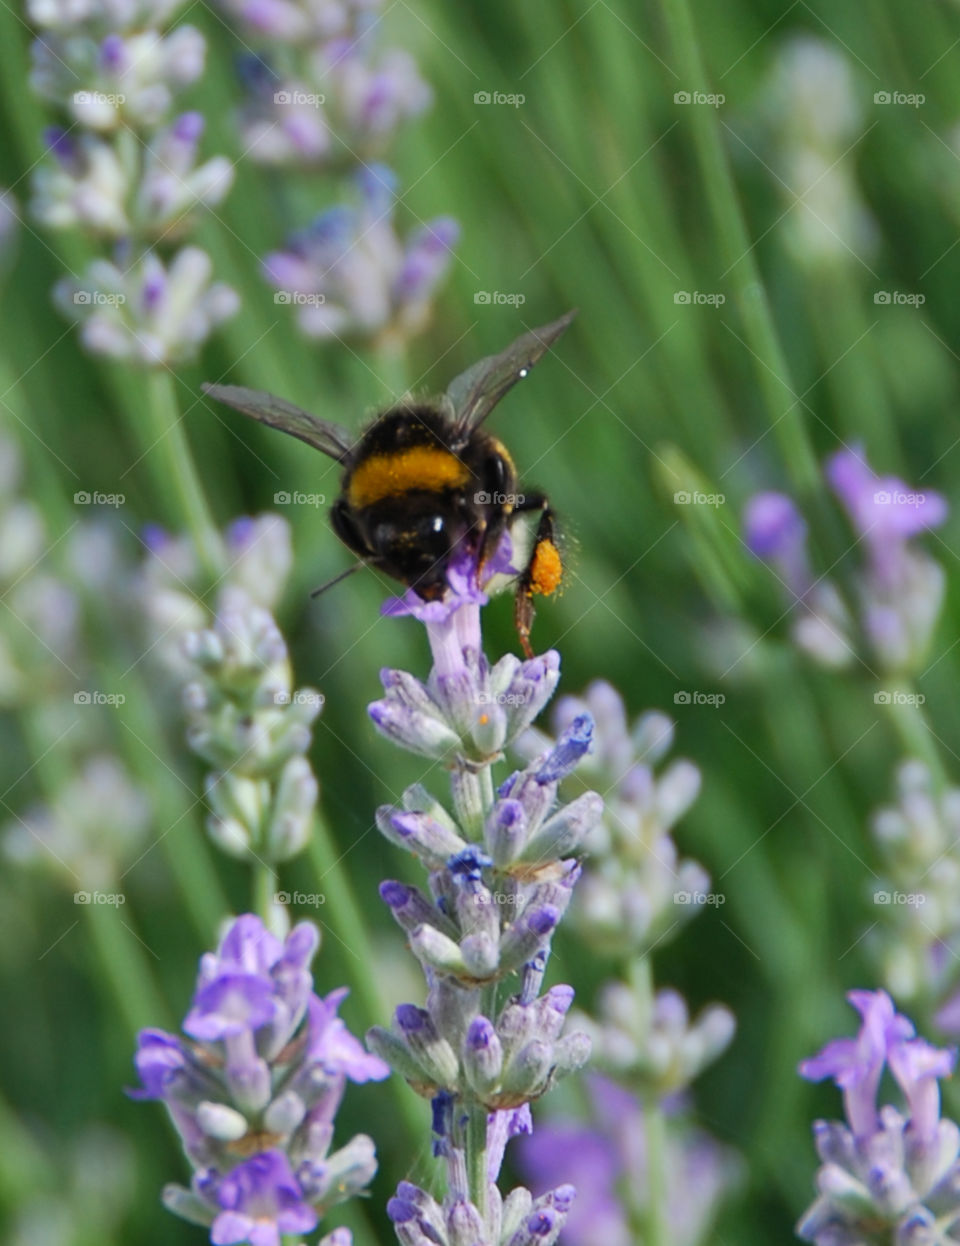 A Humblebee on Lavender